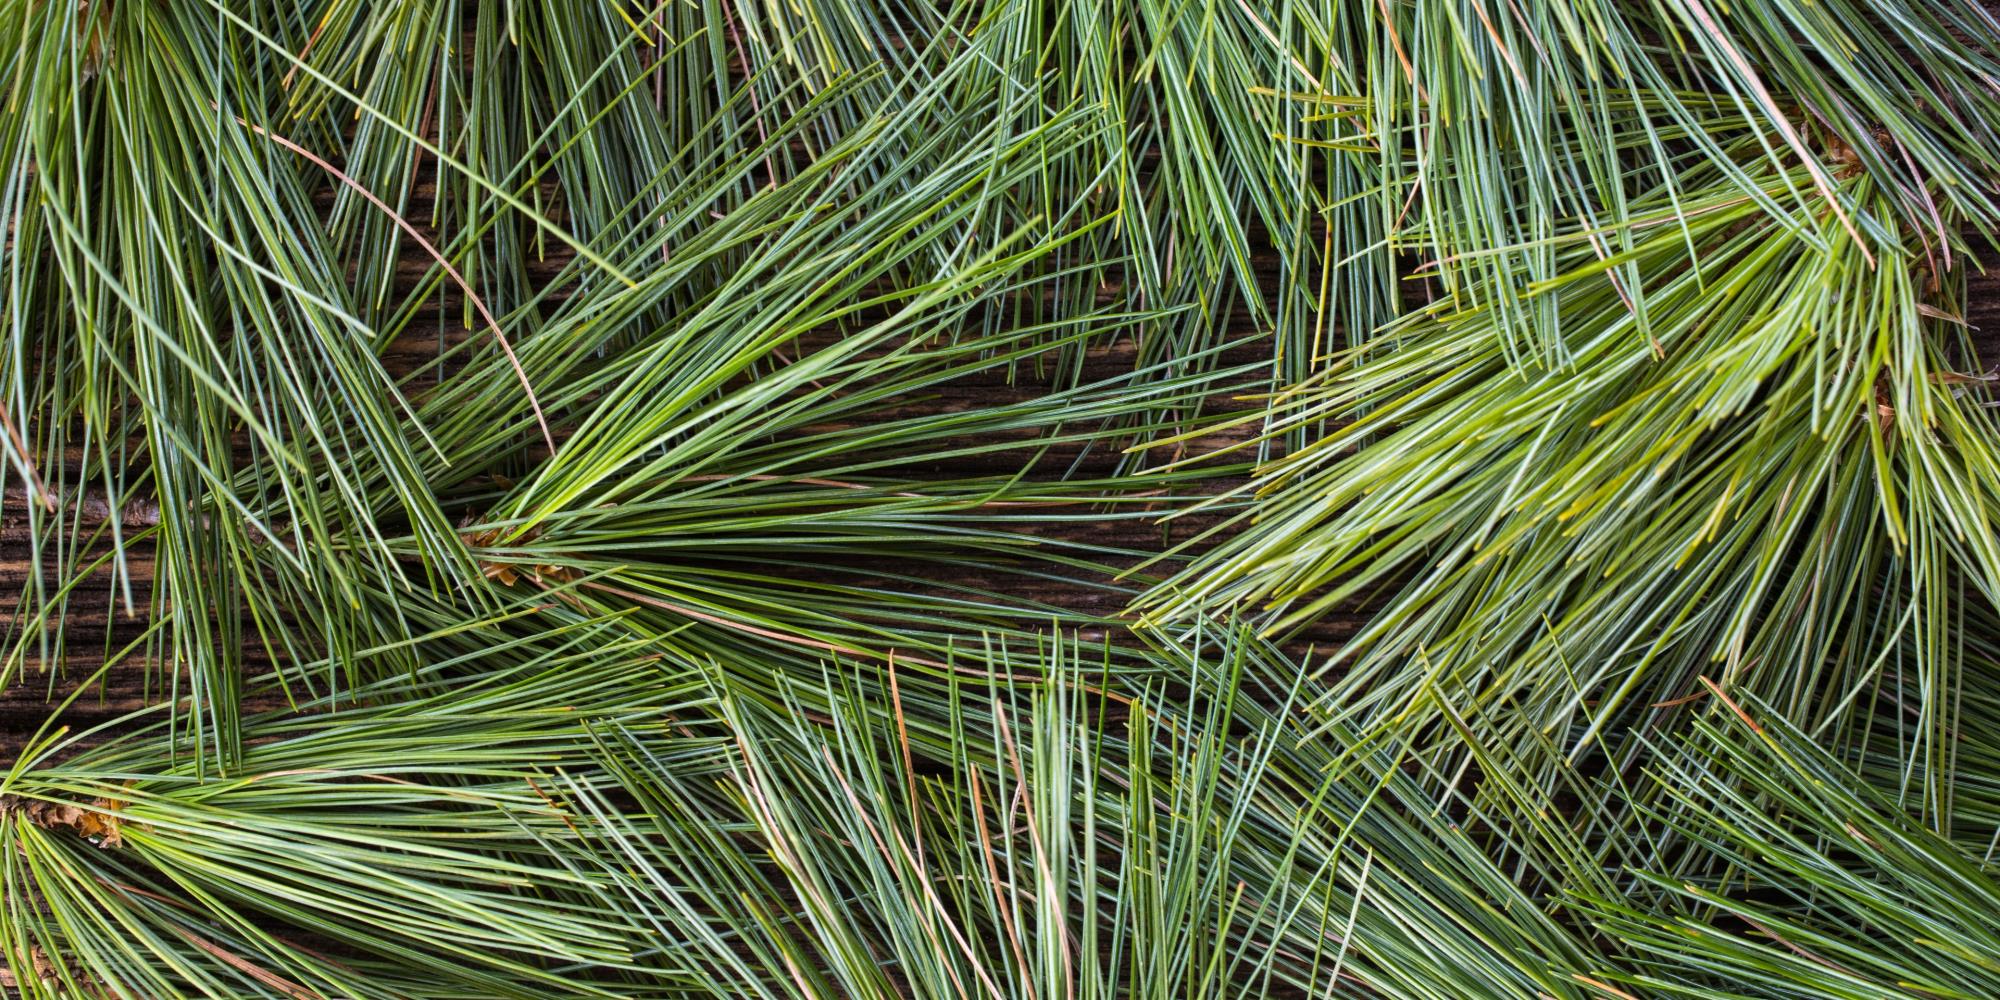 Pine Needles Bad for Our Gardens? - Watters Garden Center